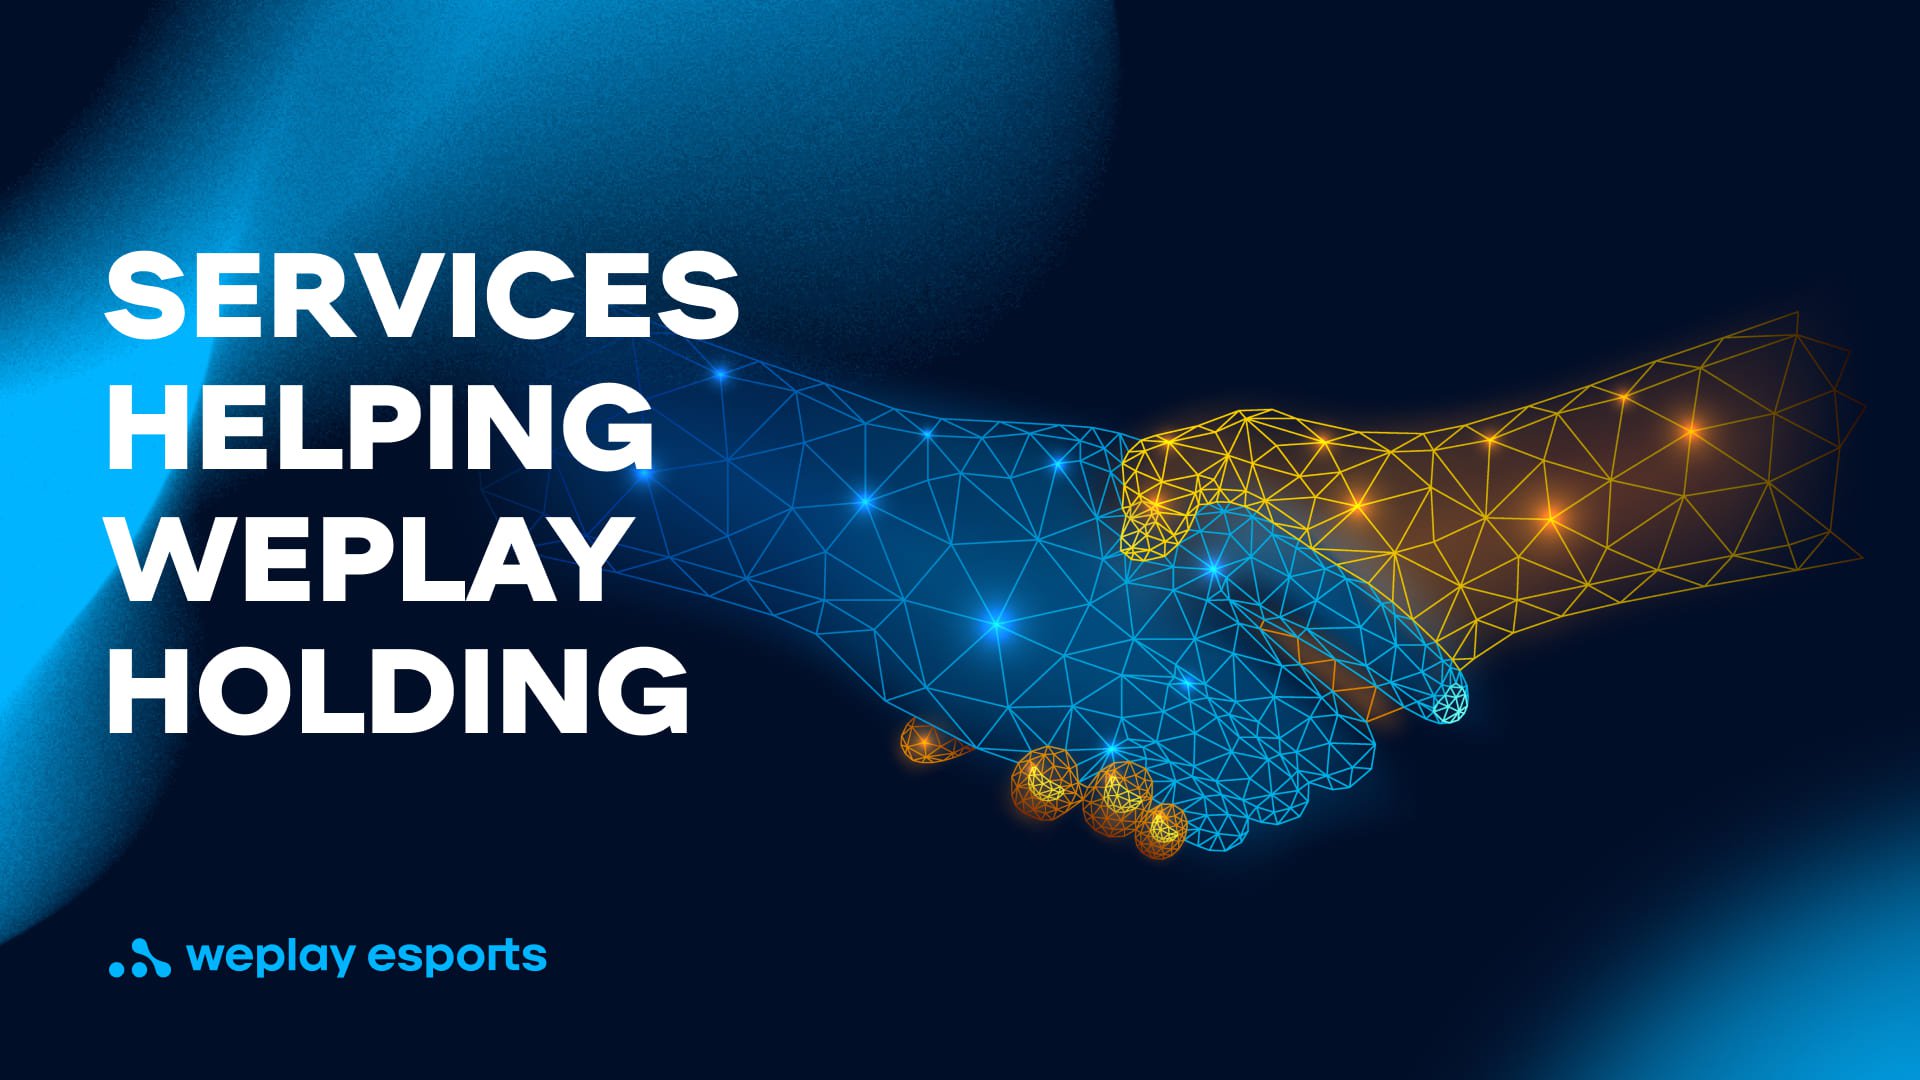 Services helping WePlay Holding. Credit: WePlay Holding